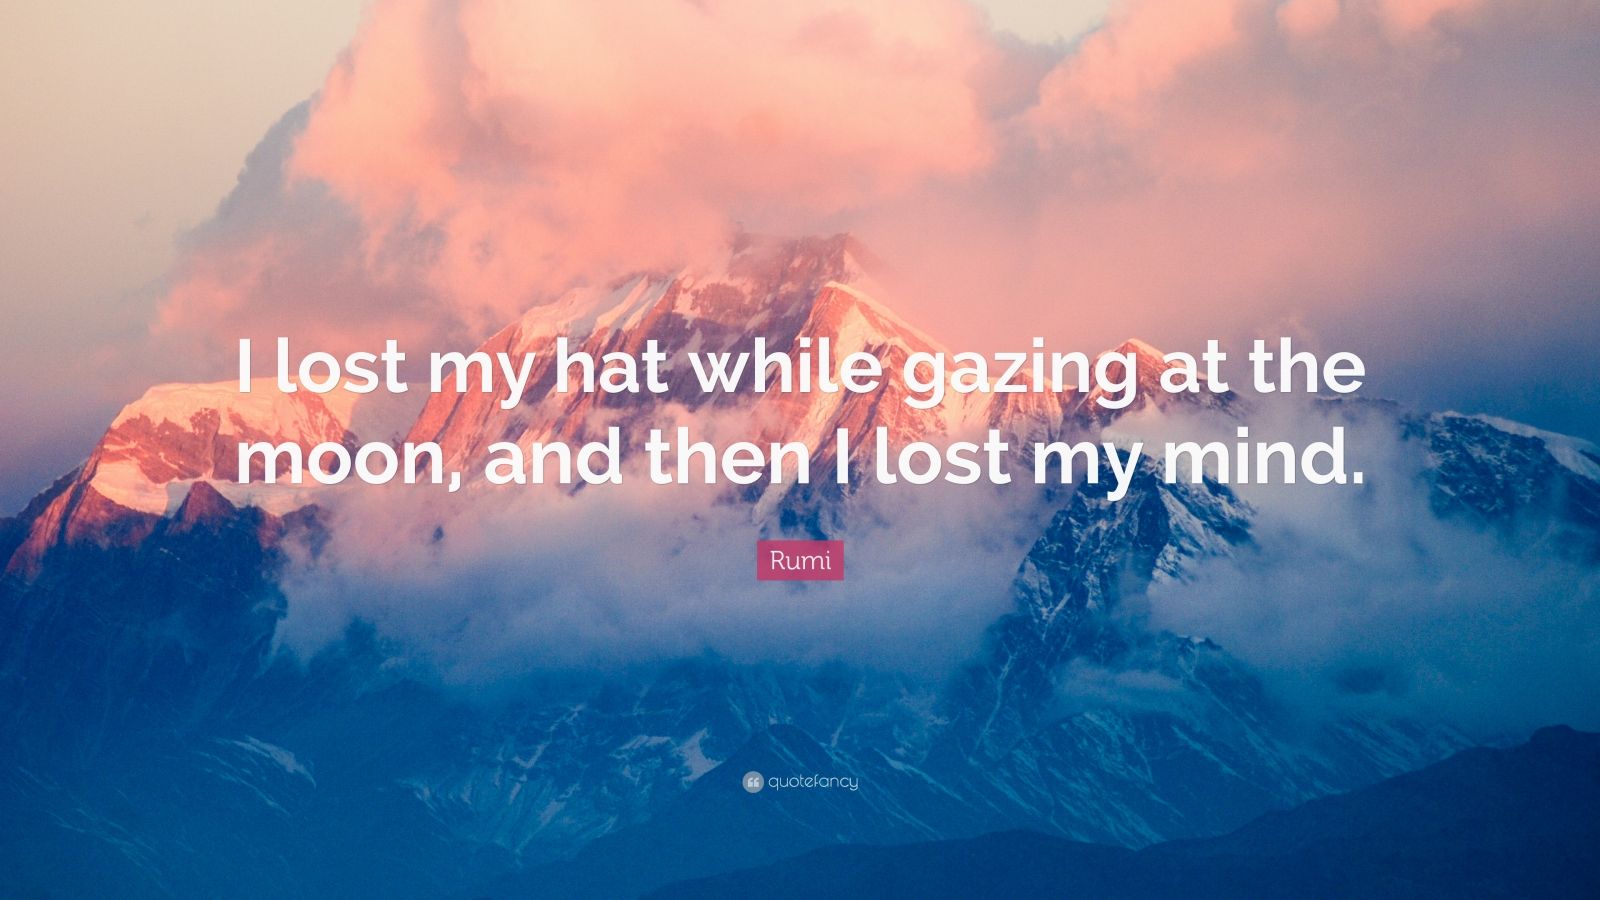 Rumi Quote: "I lost my hat while gazing at the moon, and ...